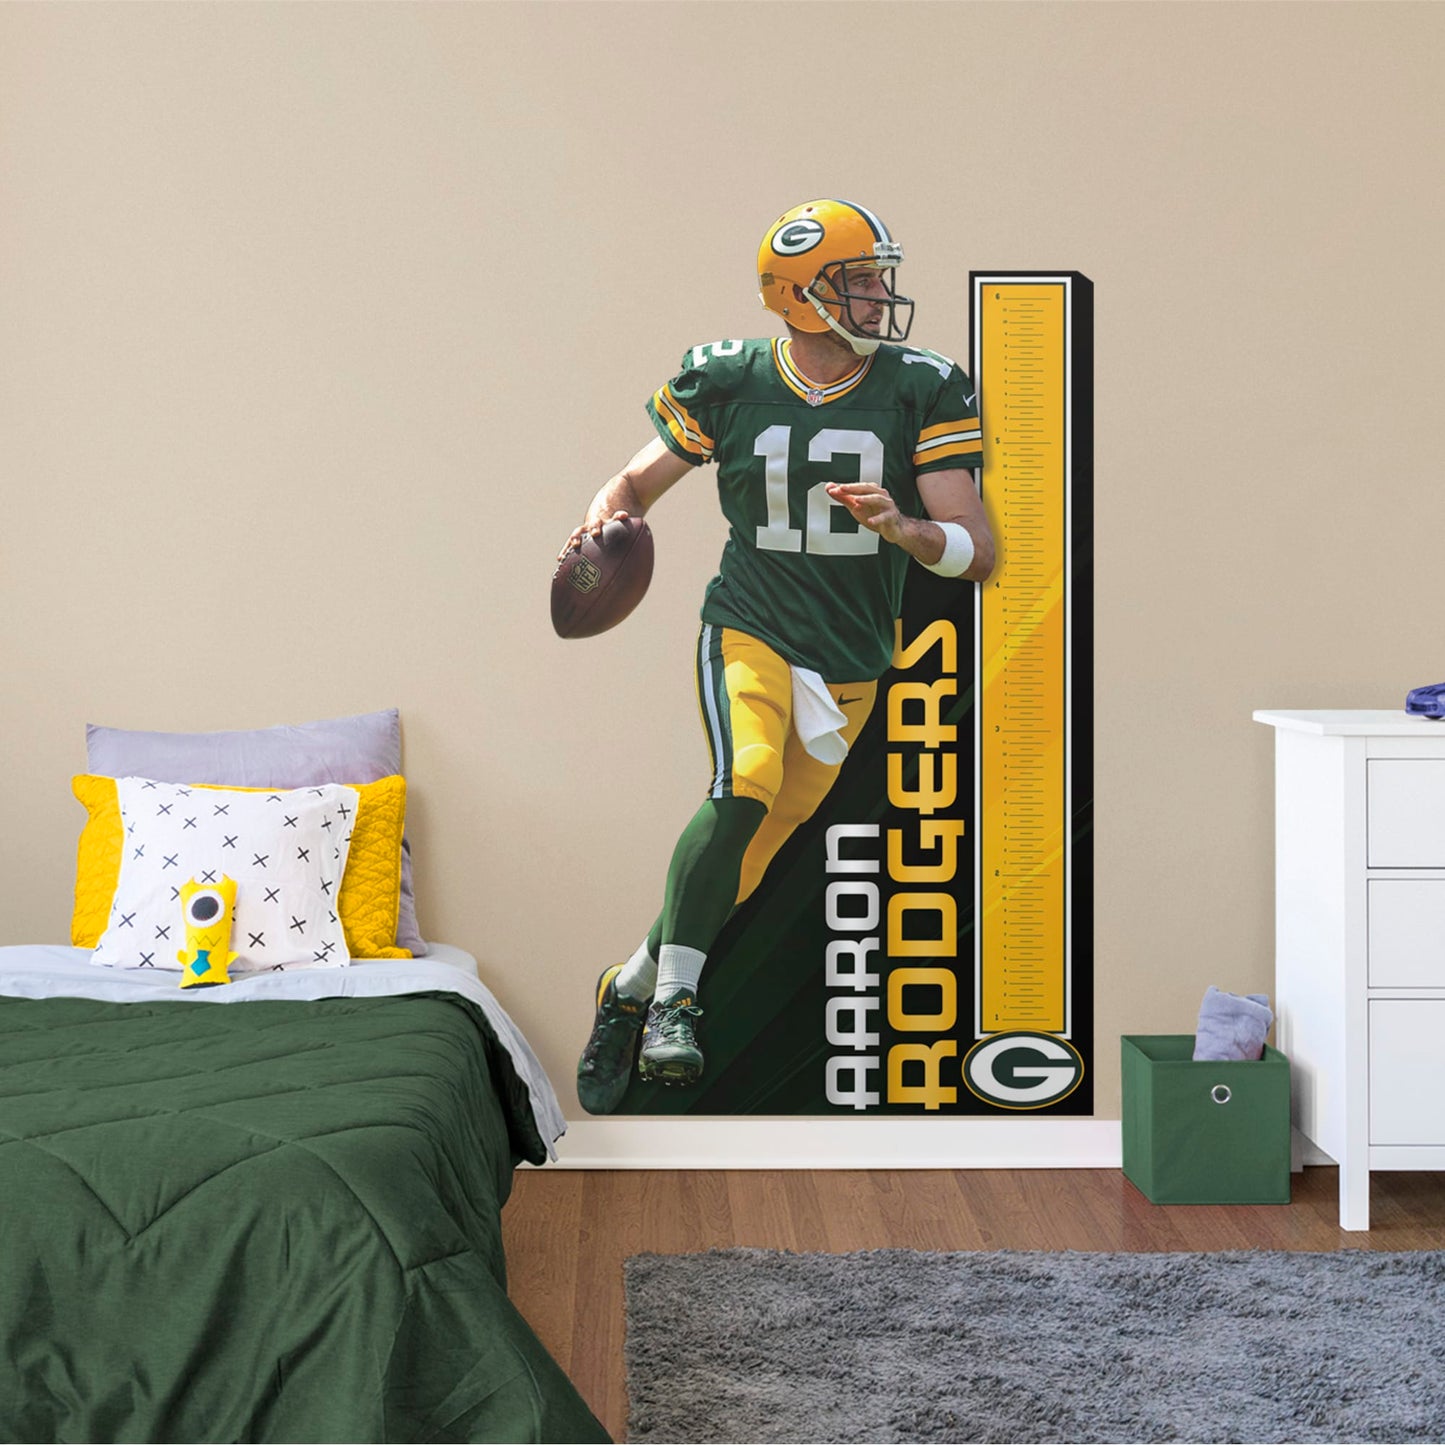 Turn your home into Mr. Rodger's Neighborhood with a durable vinyl wall decal of two-time NFL MVP Aaron Rodgers. Scouring the field for an open Green Bay receiver, A-Rodg is poised to notch another Packer TD. Easy to attach and remove, the life-size growth chart decal featuring one of Lambeau Field's greats is well-suited for a bedroom, media room, or in-home office.